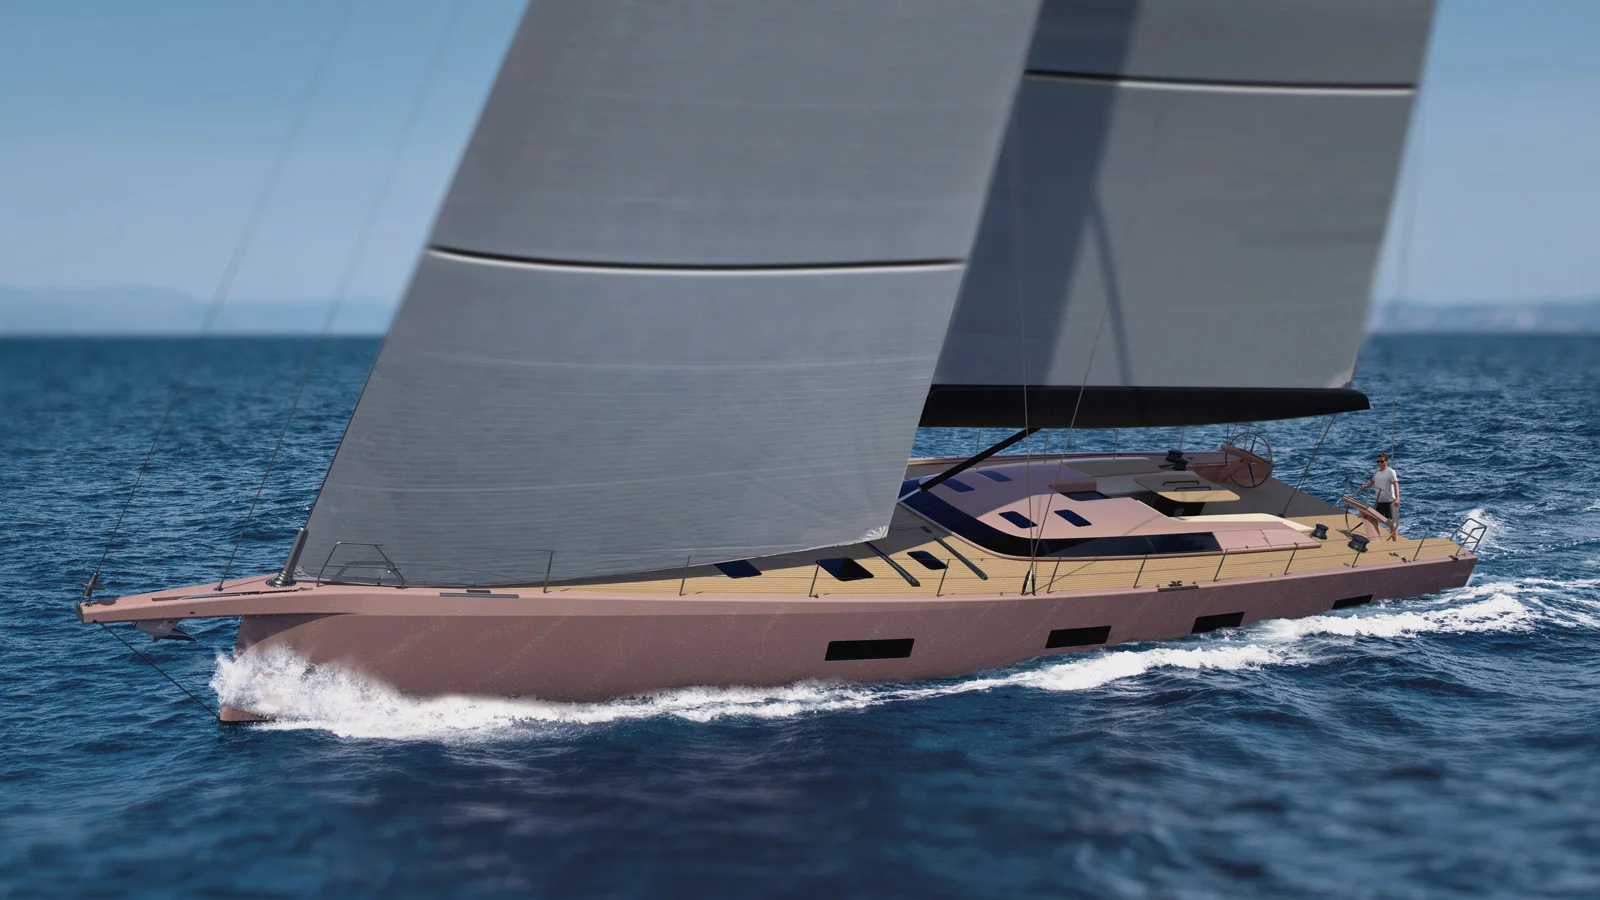 The Baltic 80 Custom is described as a “multi-role” yacht suitable both for racing and family cruising